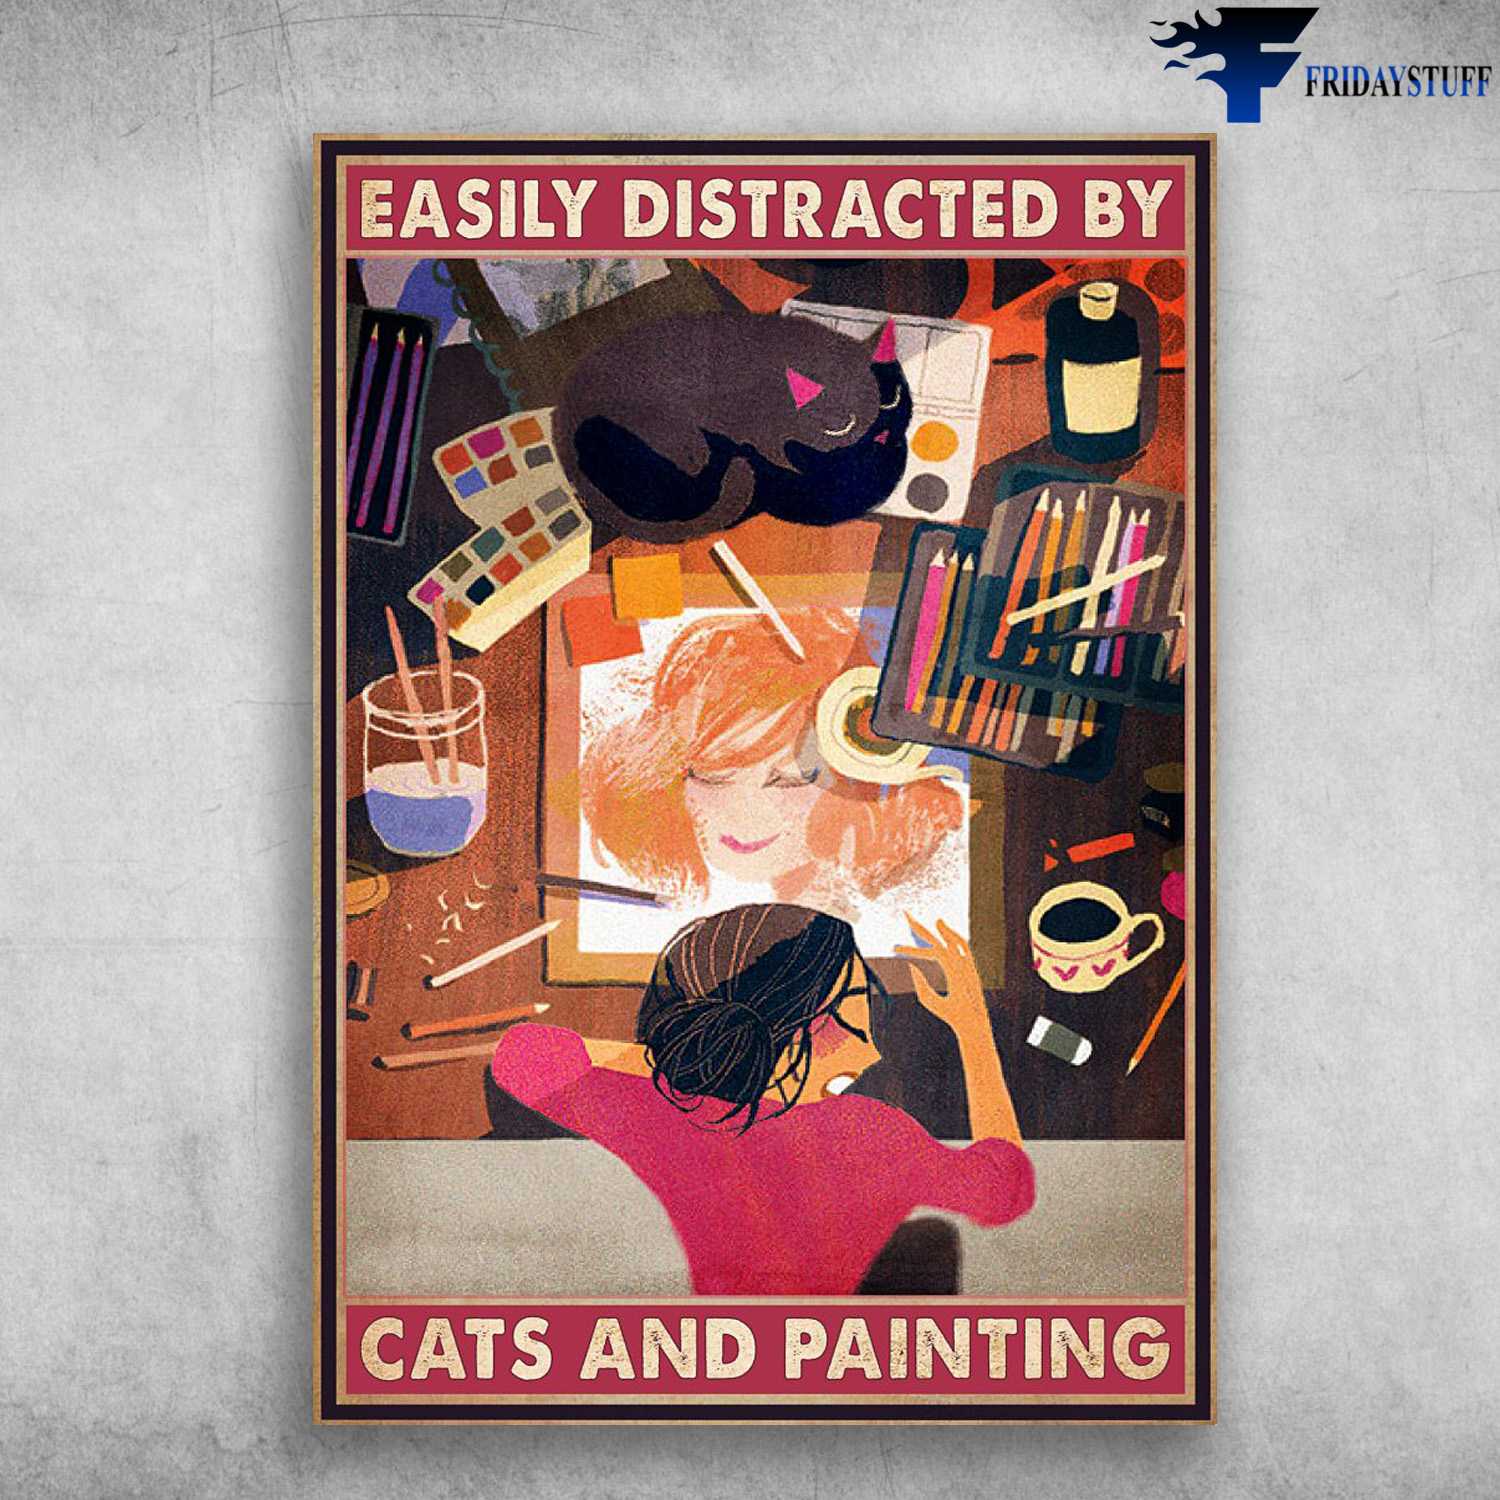 Cat Lover, Painting Lover, Easily Distracted By, Cats And Painting